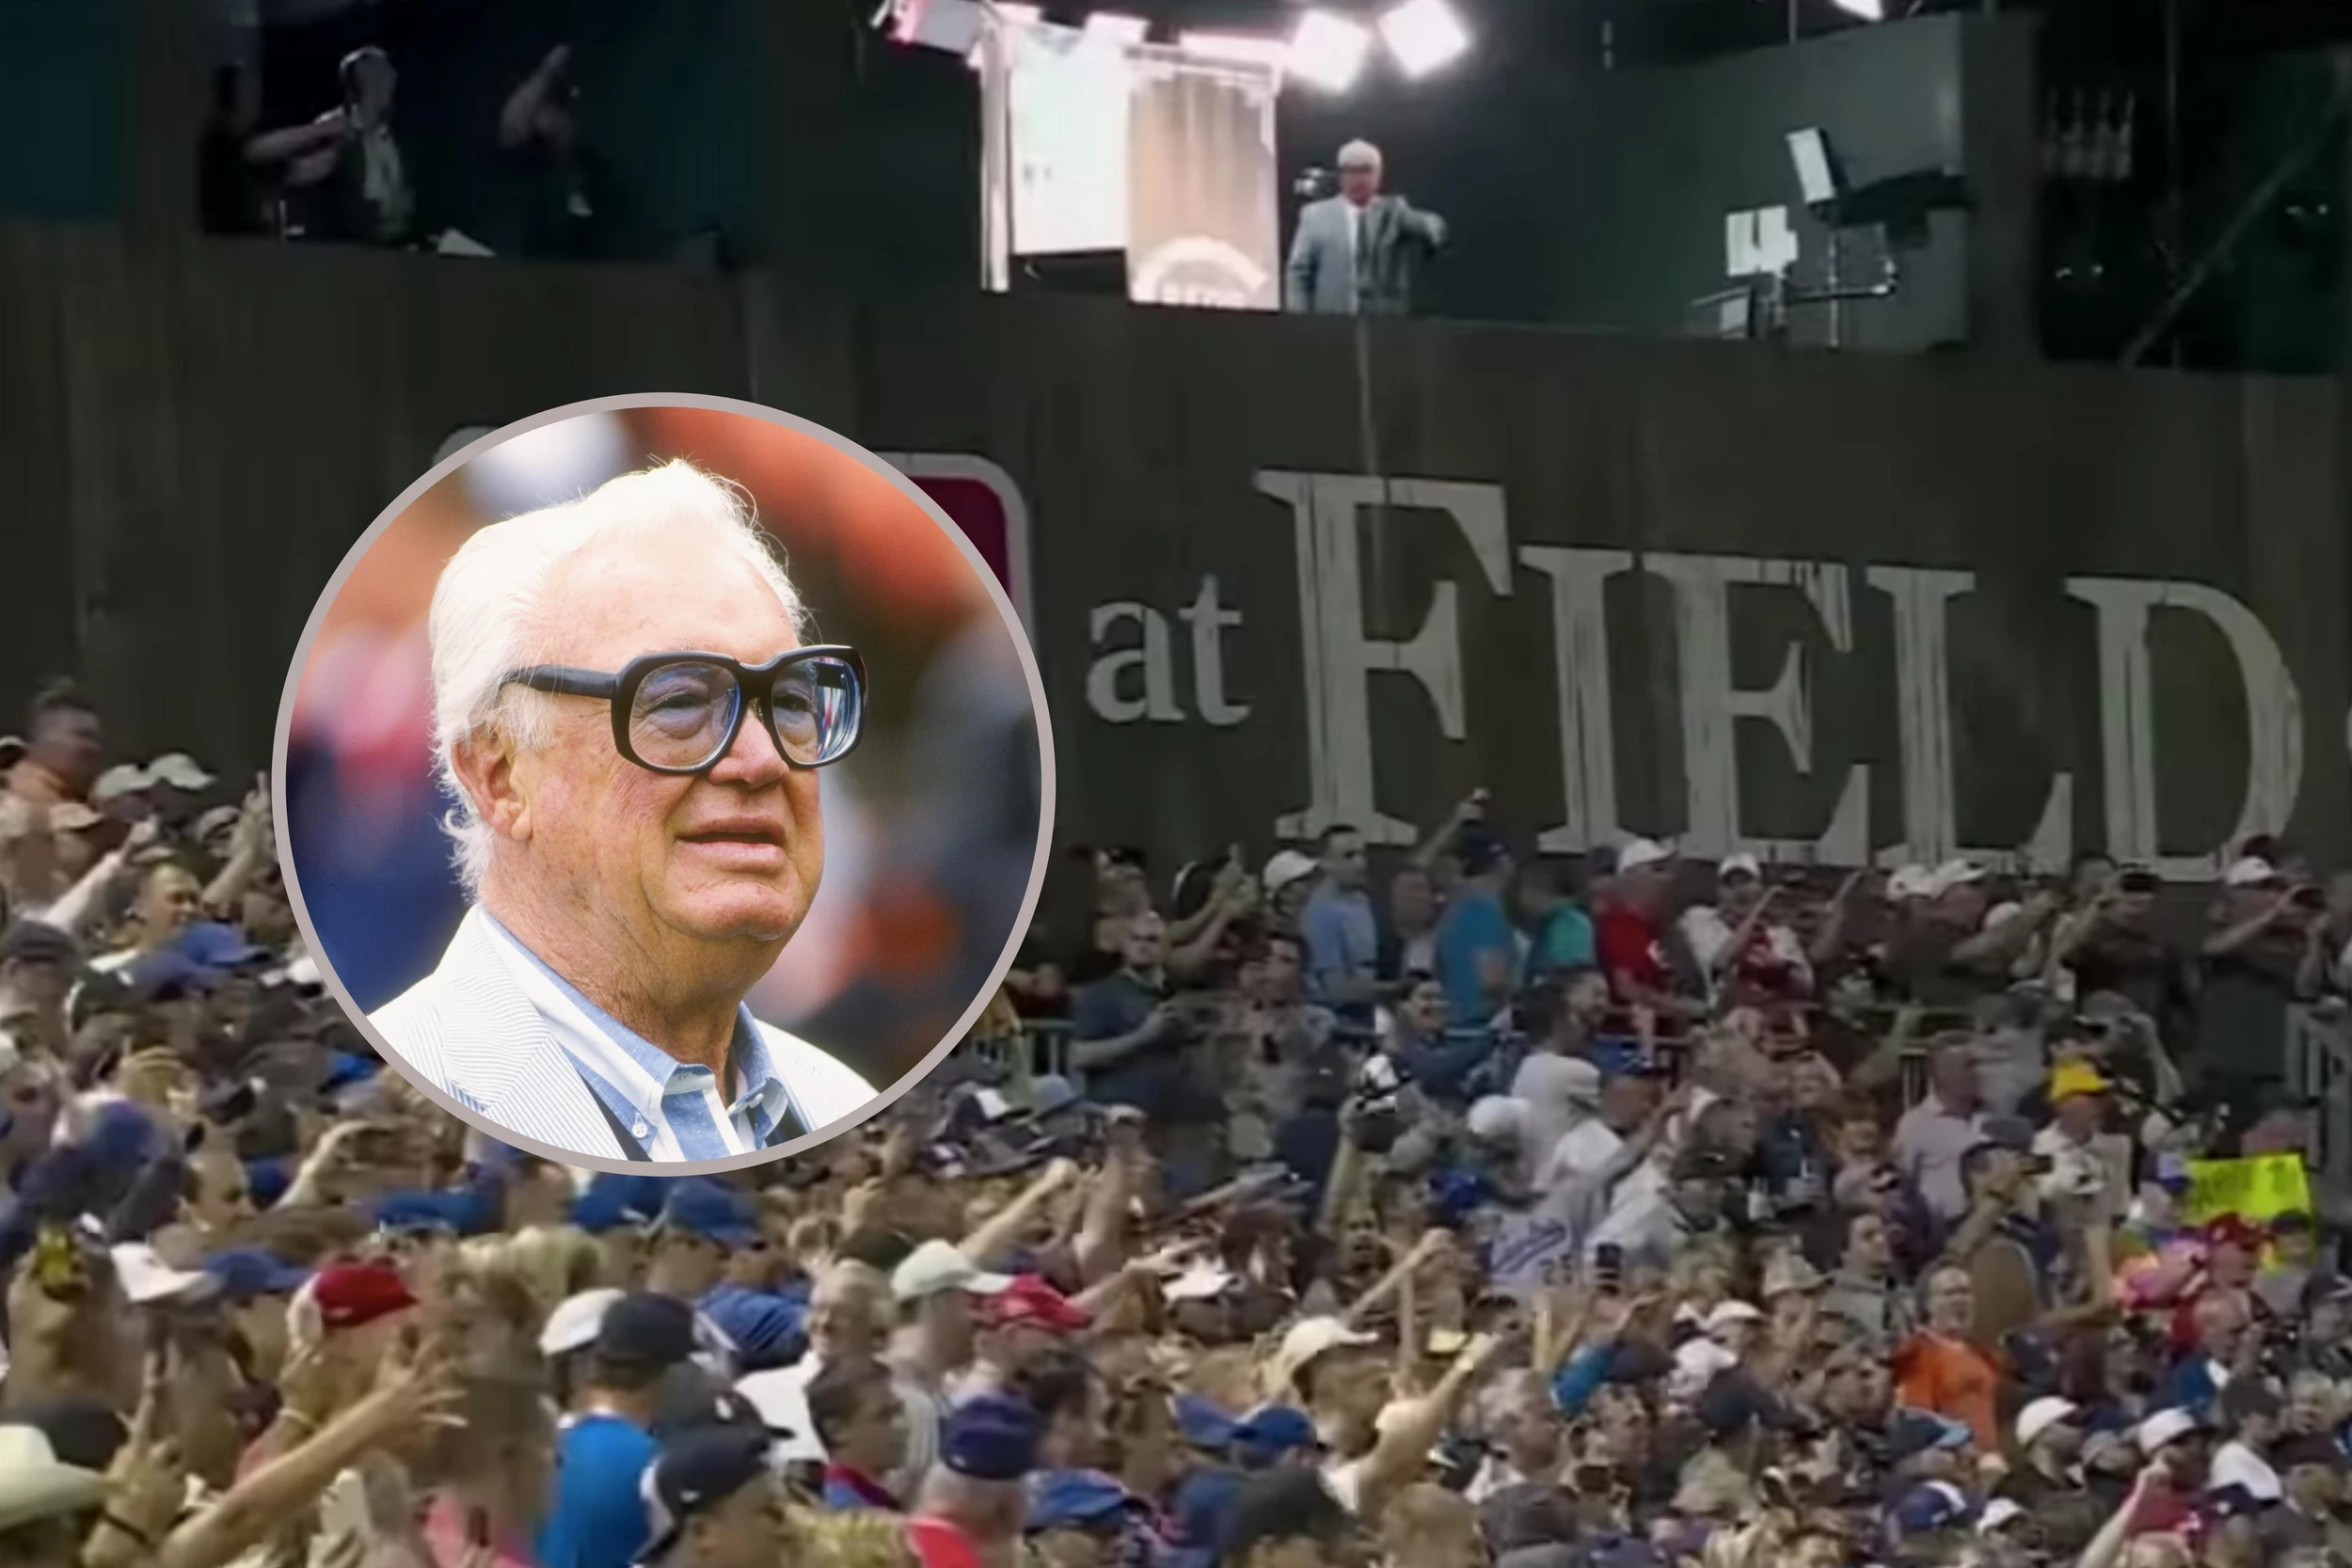 Hologram Harry Caray's 7th inning stretch at Field of Dreams game